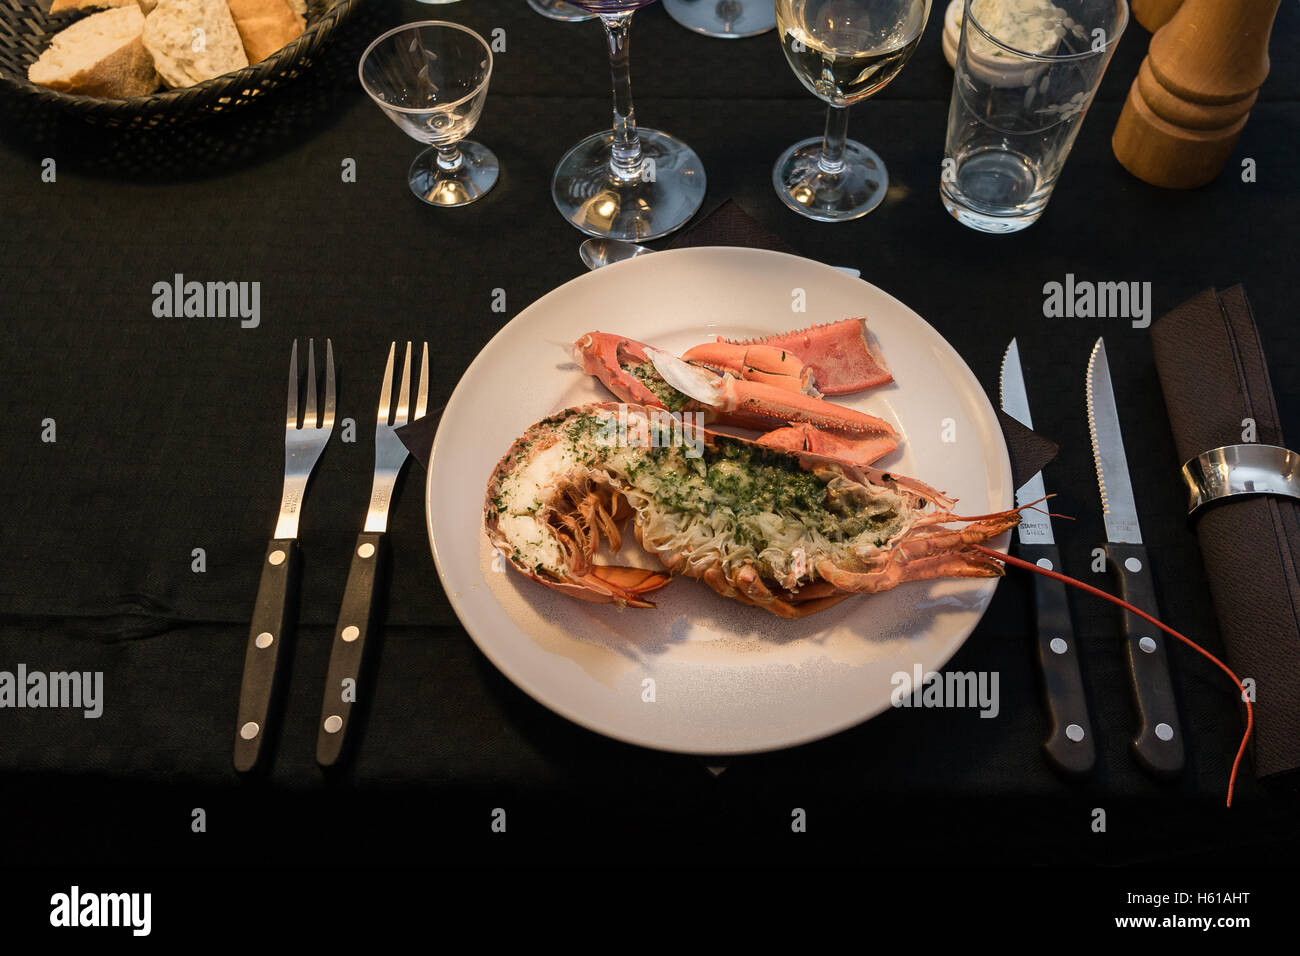 A lobster dinner on new years eve, set up on a black table Stock Photo